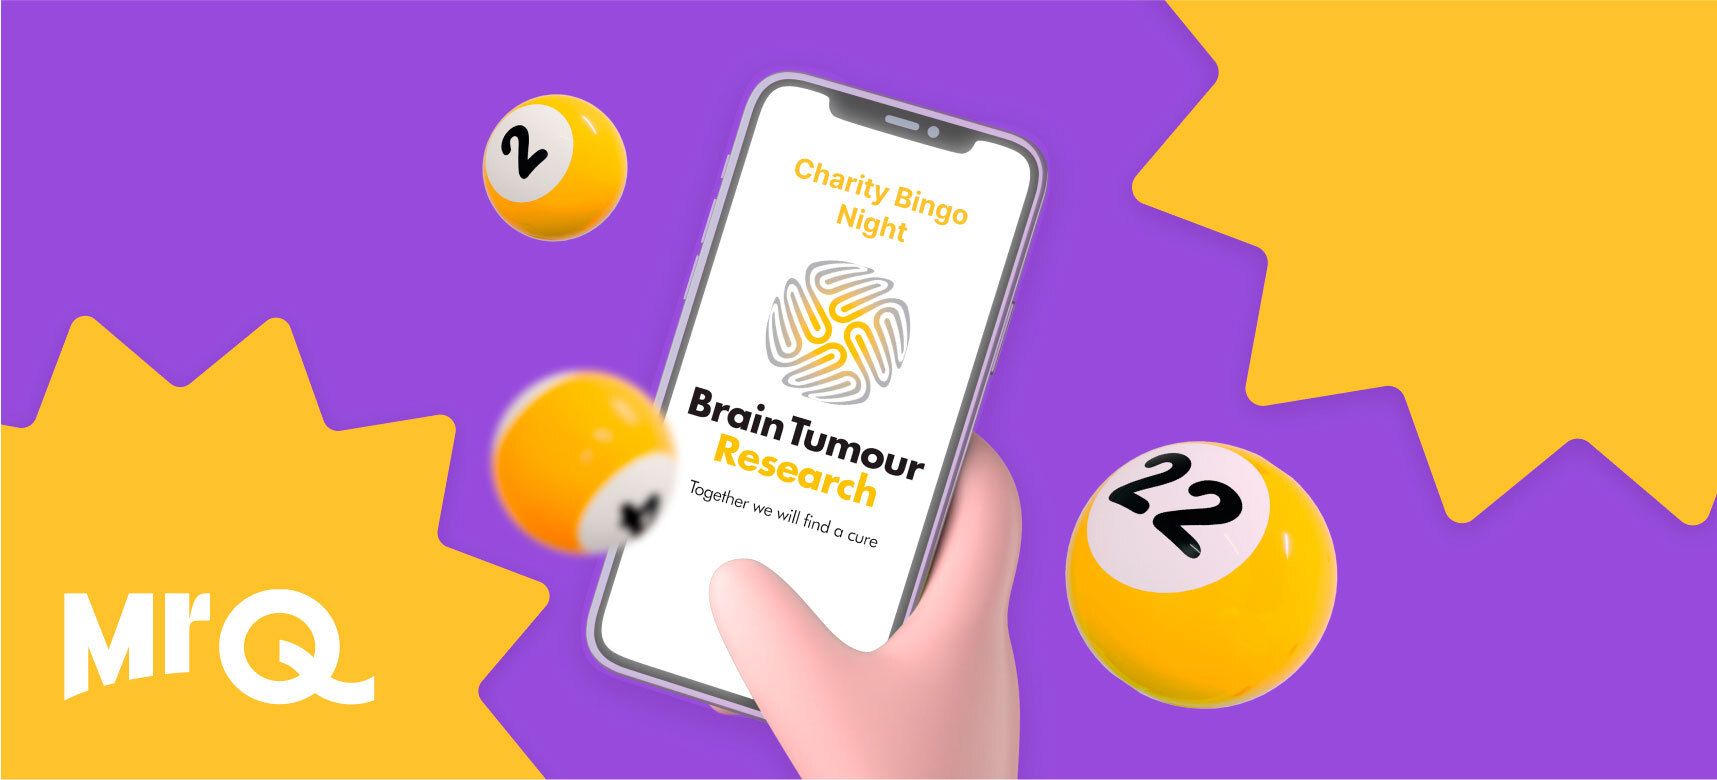 Join MrQ's Charity Bingo Night to Support Brain Tumour Research